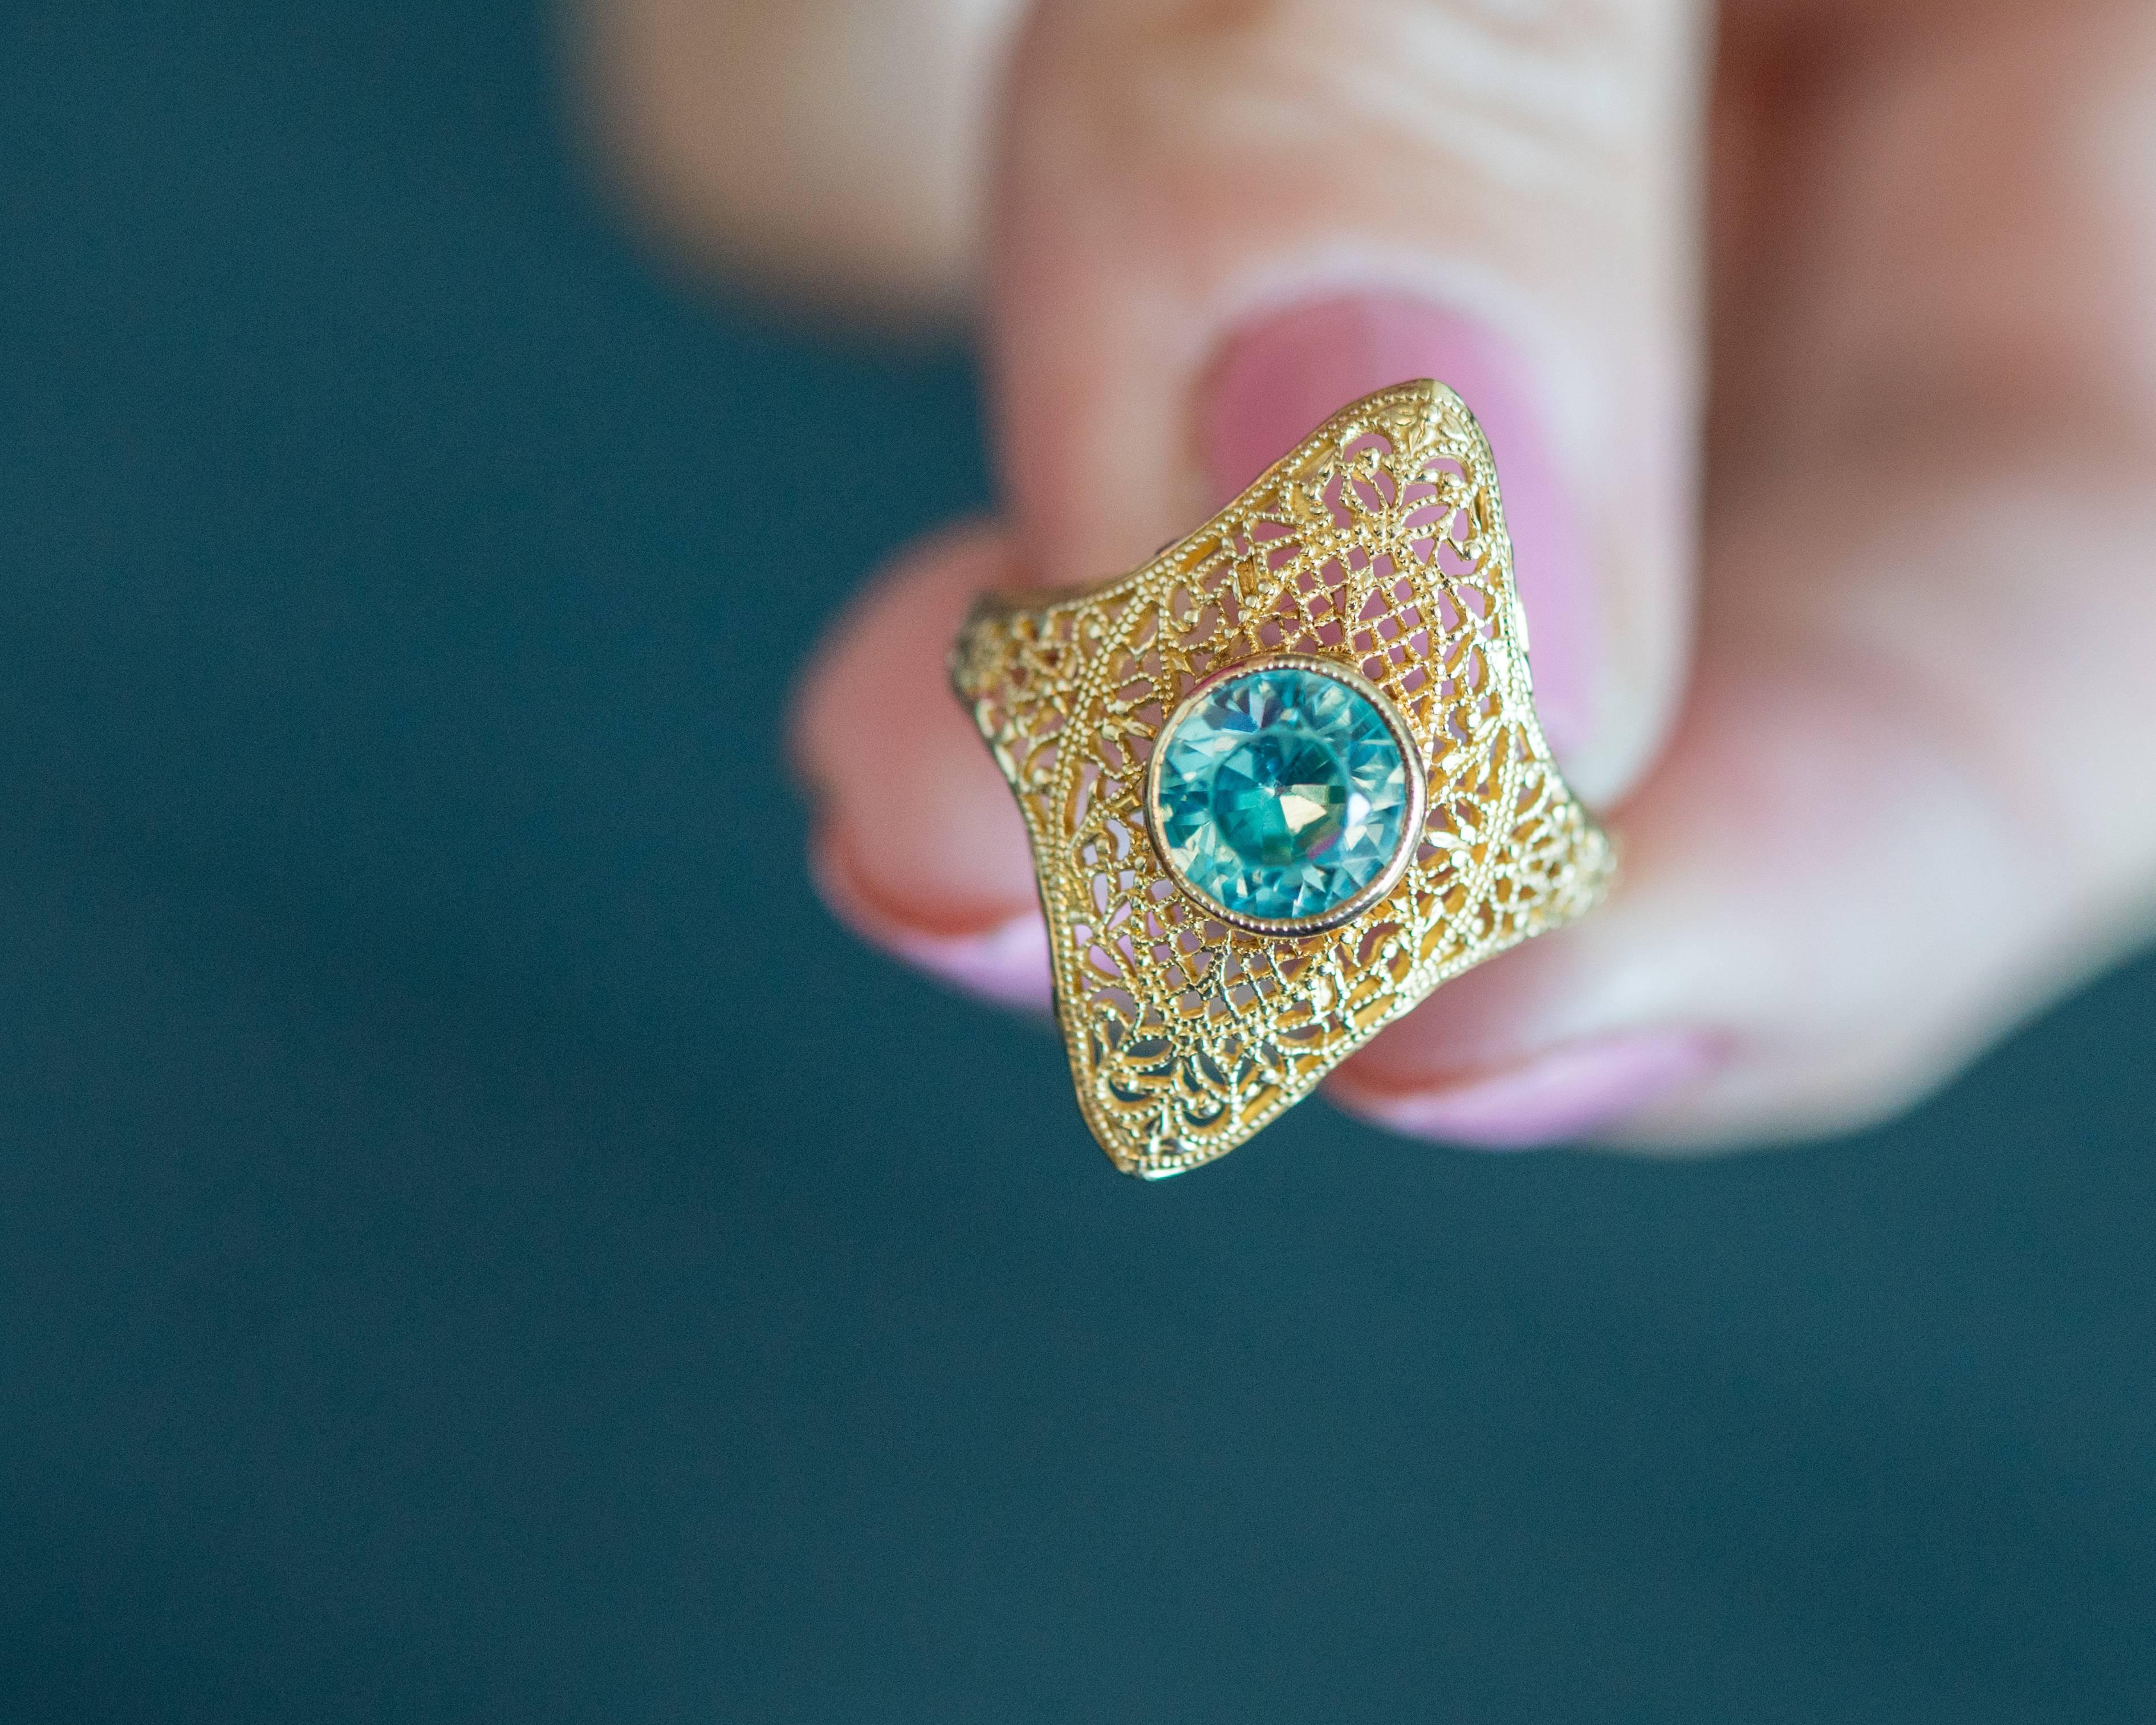 This 1940s Natural Blue Zircon ring features a 1.25 carat clear light blue zircon center stone bezel set in a richly hued 14 karat yellow gold which also comprises the marquise shaped filigree head and shoulders of the ring. This timeless ring will